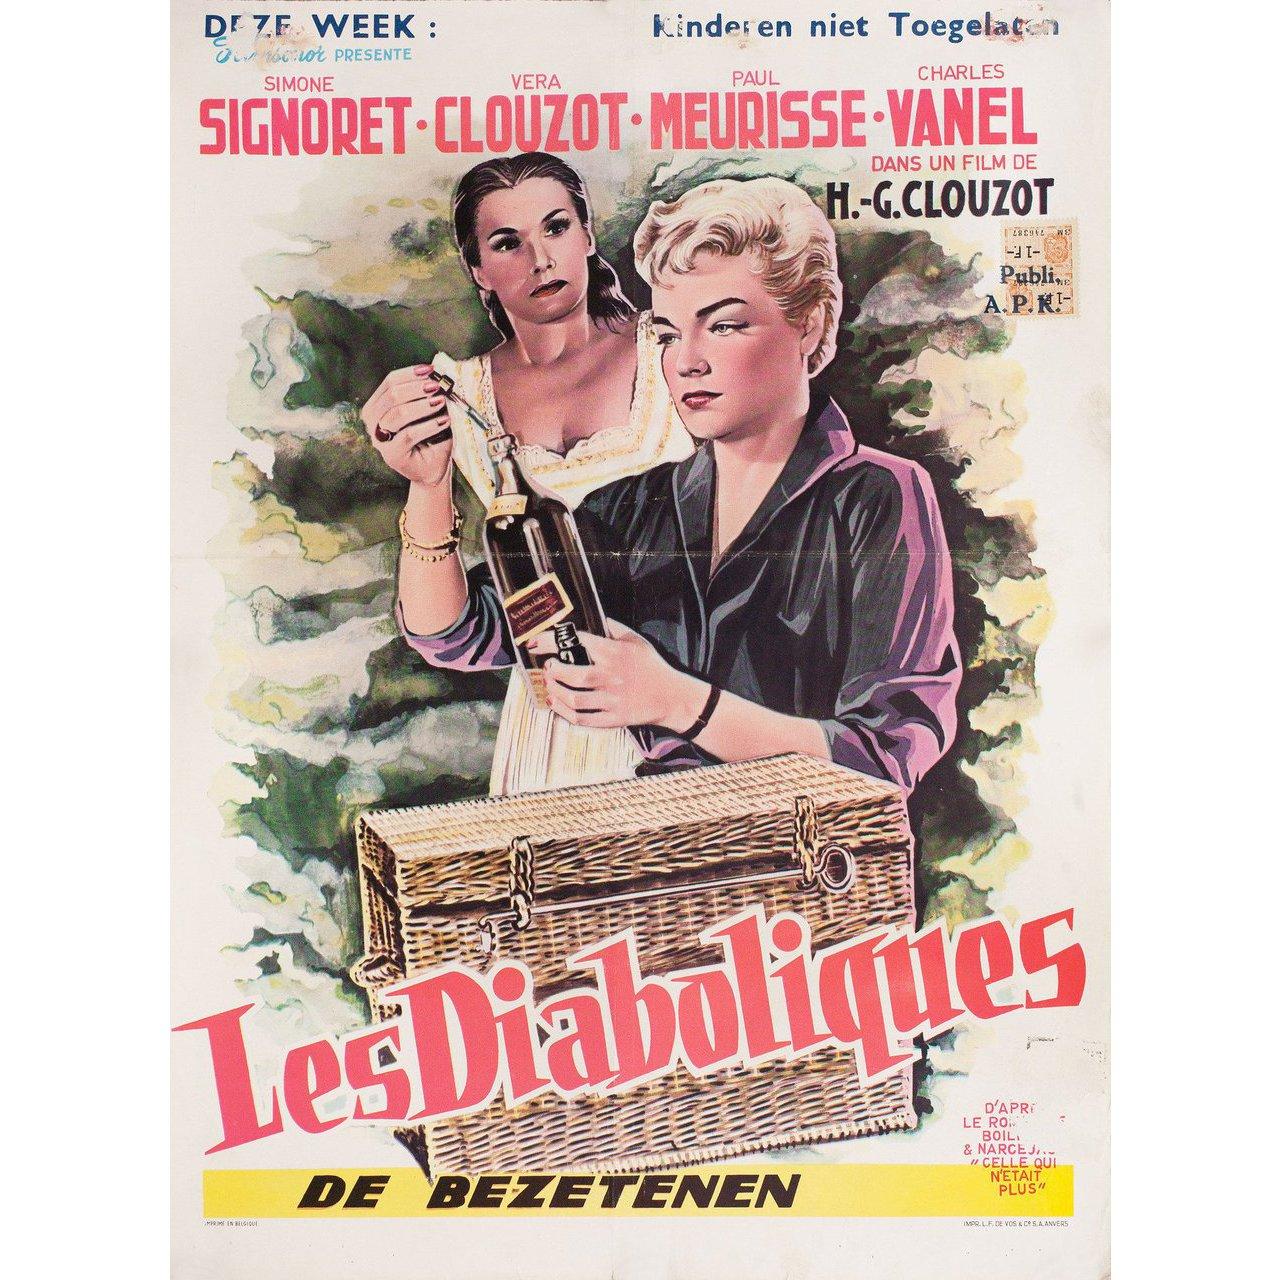 Original 1955 Belgian poster for. Very good-fine condition, folded. Many original posters were issued folded or were subsequently folded. Please note: the size is stated in inches and the actual size can vary by an inch or more.
 